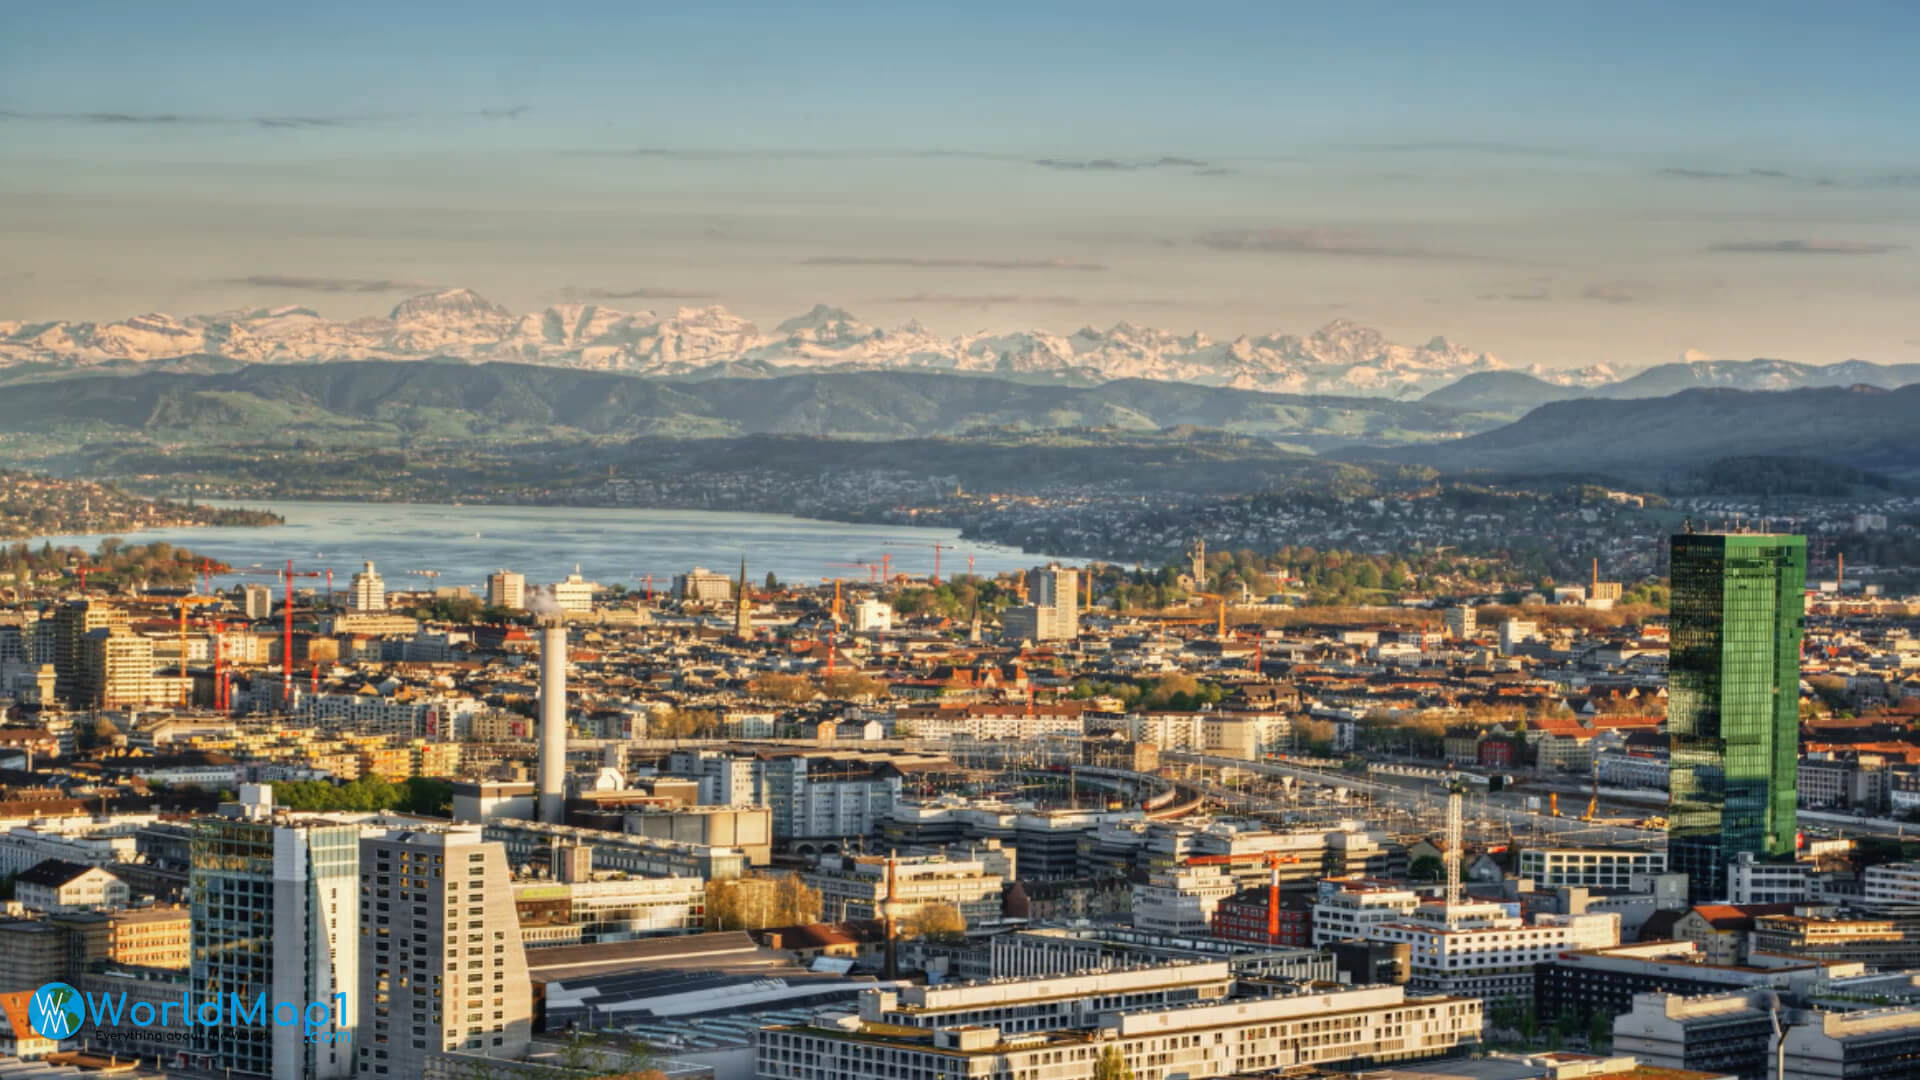 Downtown of Zurich and Alps Mountain Regions